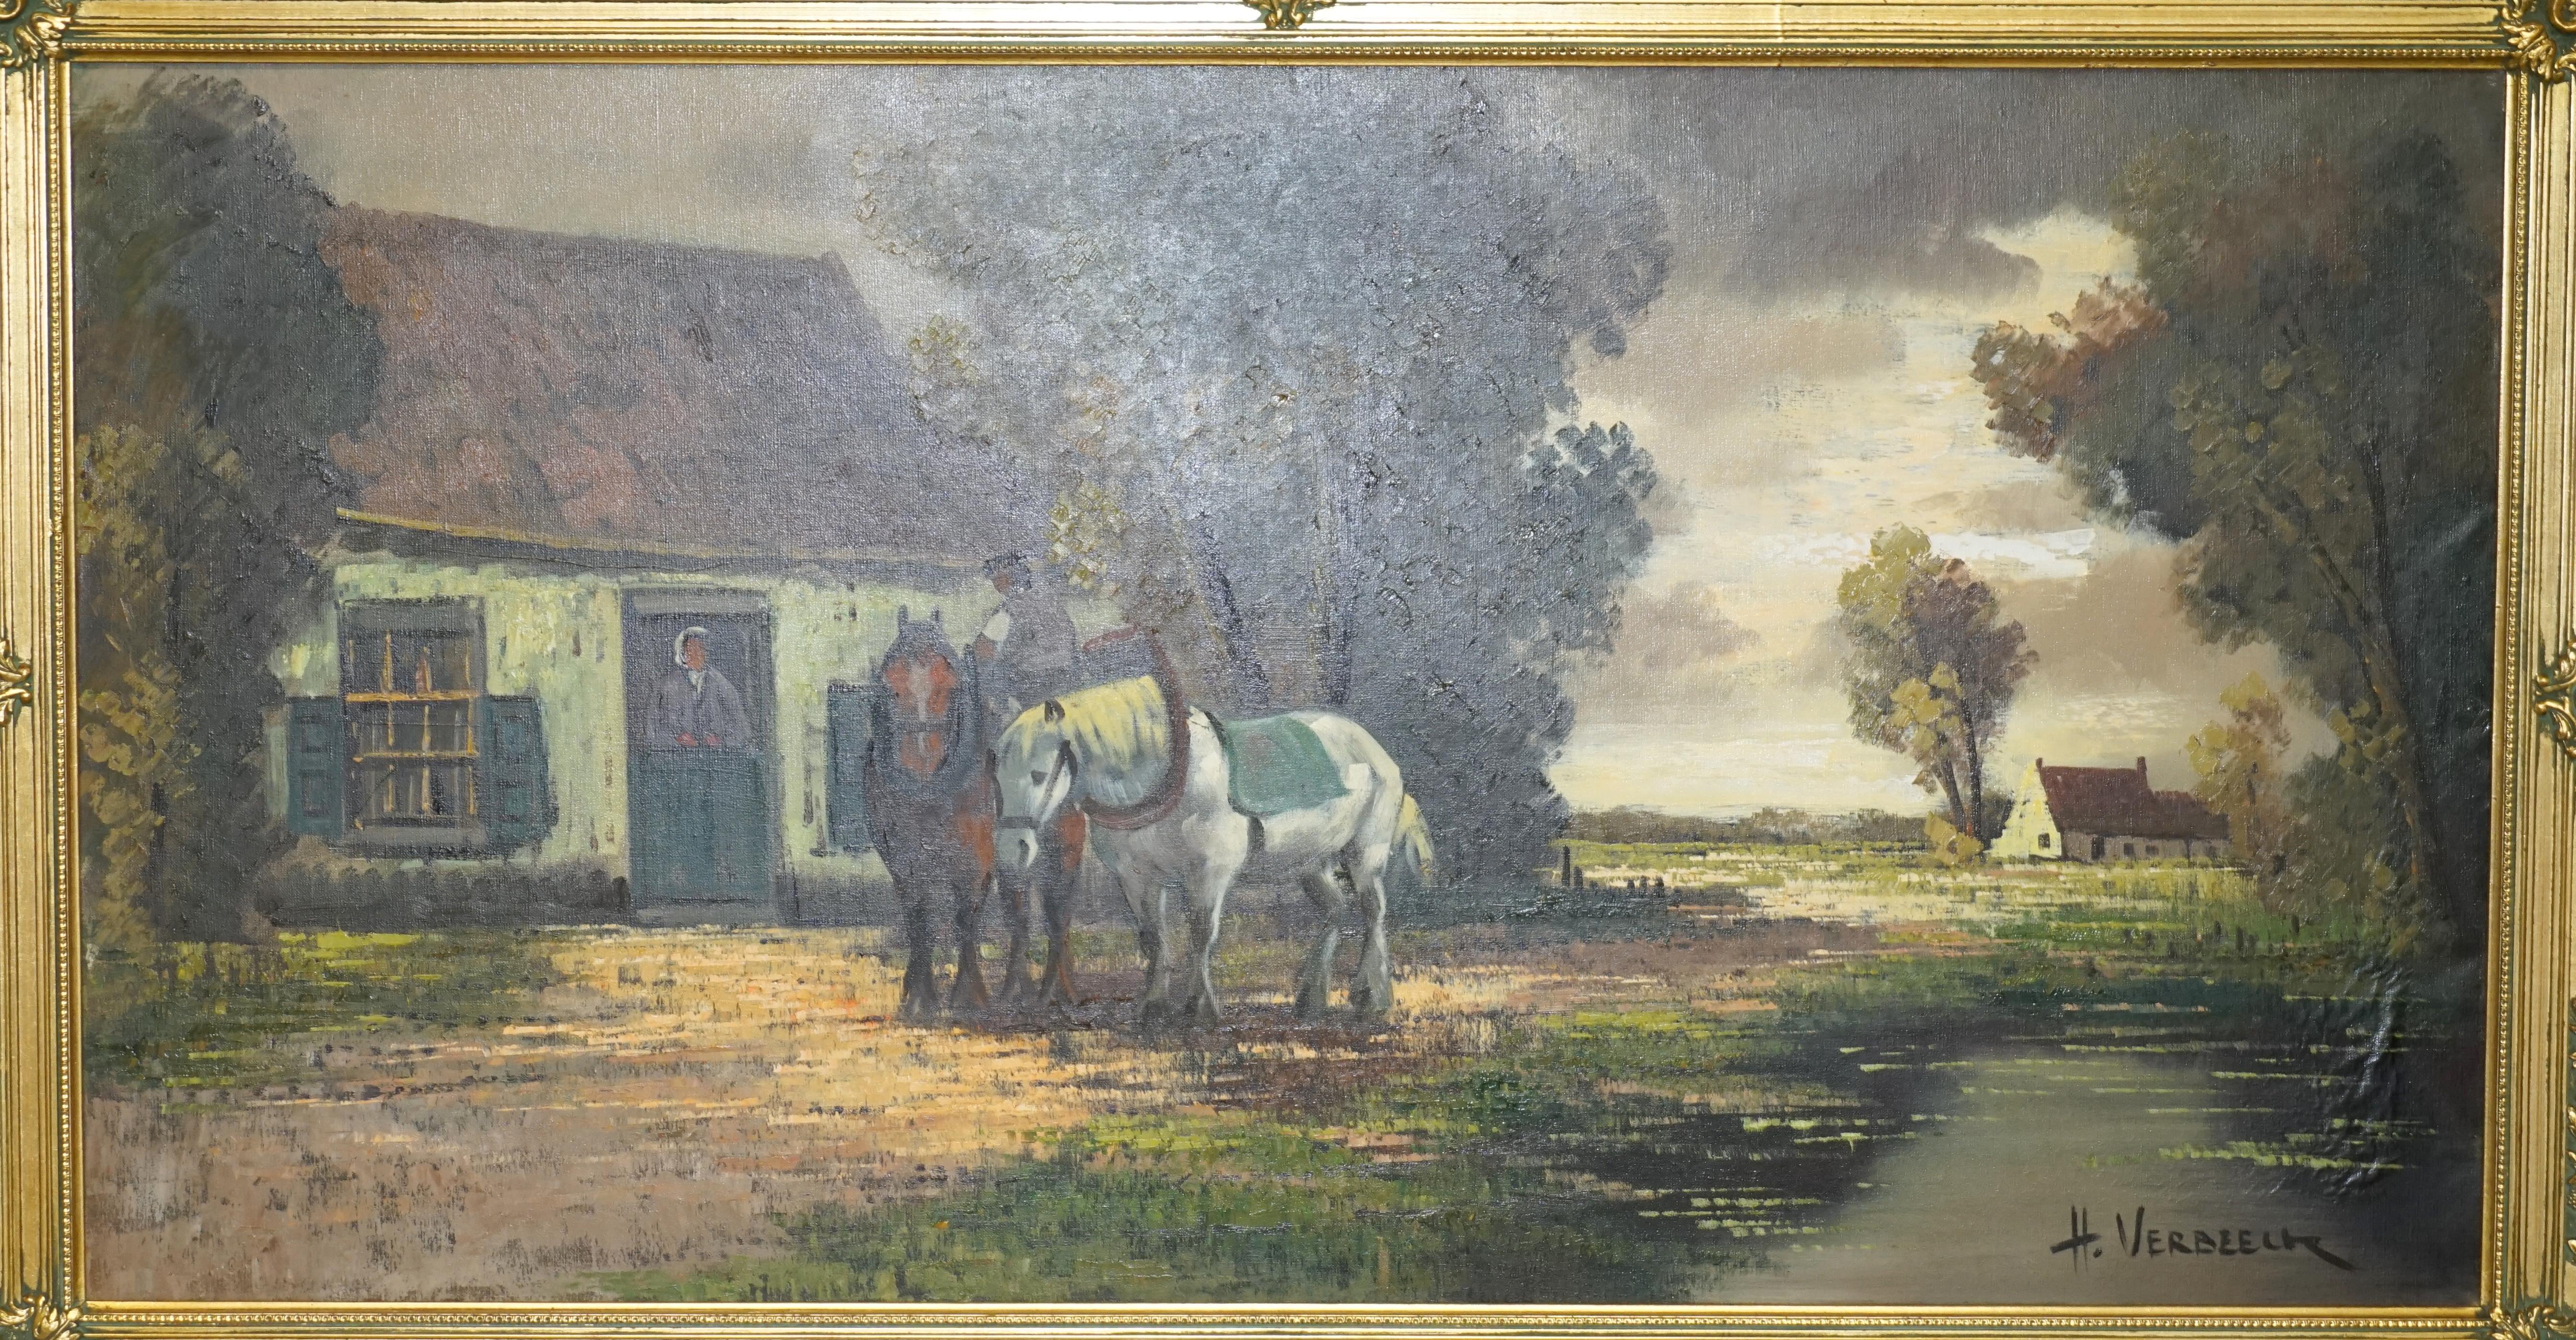 EXTRA LARGE 159X94CM H. VERBEELK SiGNED OIL PAINTING OF A RURAL SCENE WITH HORSE For Sale 3